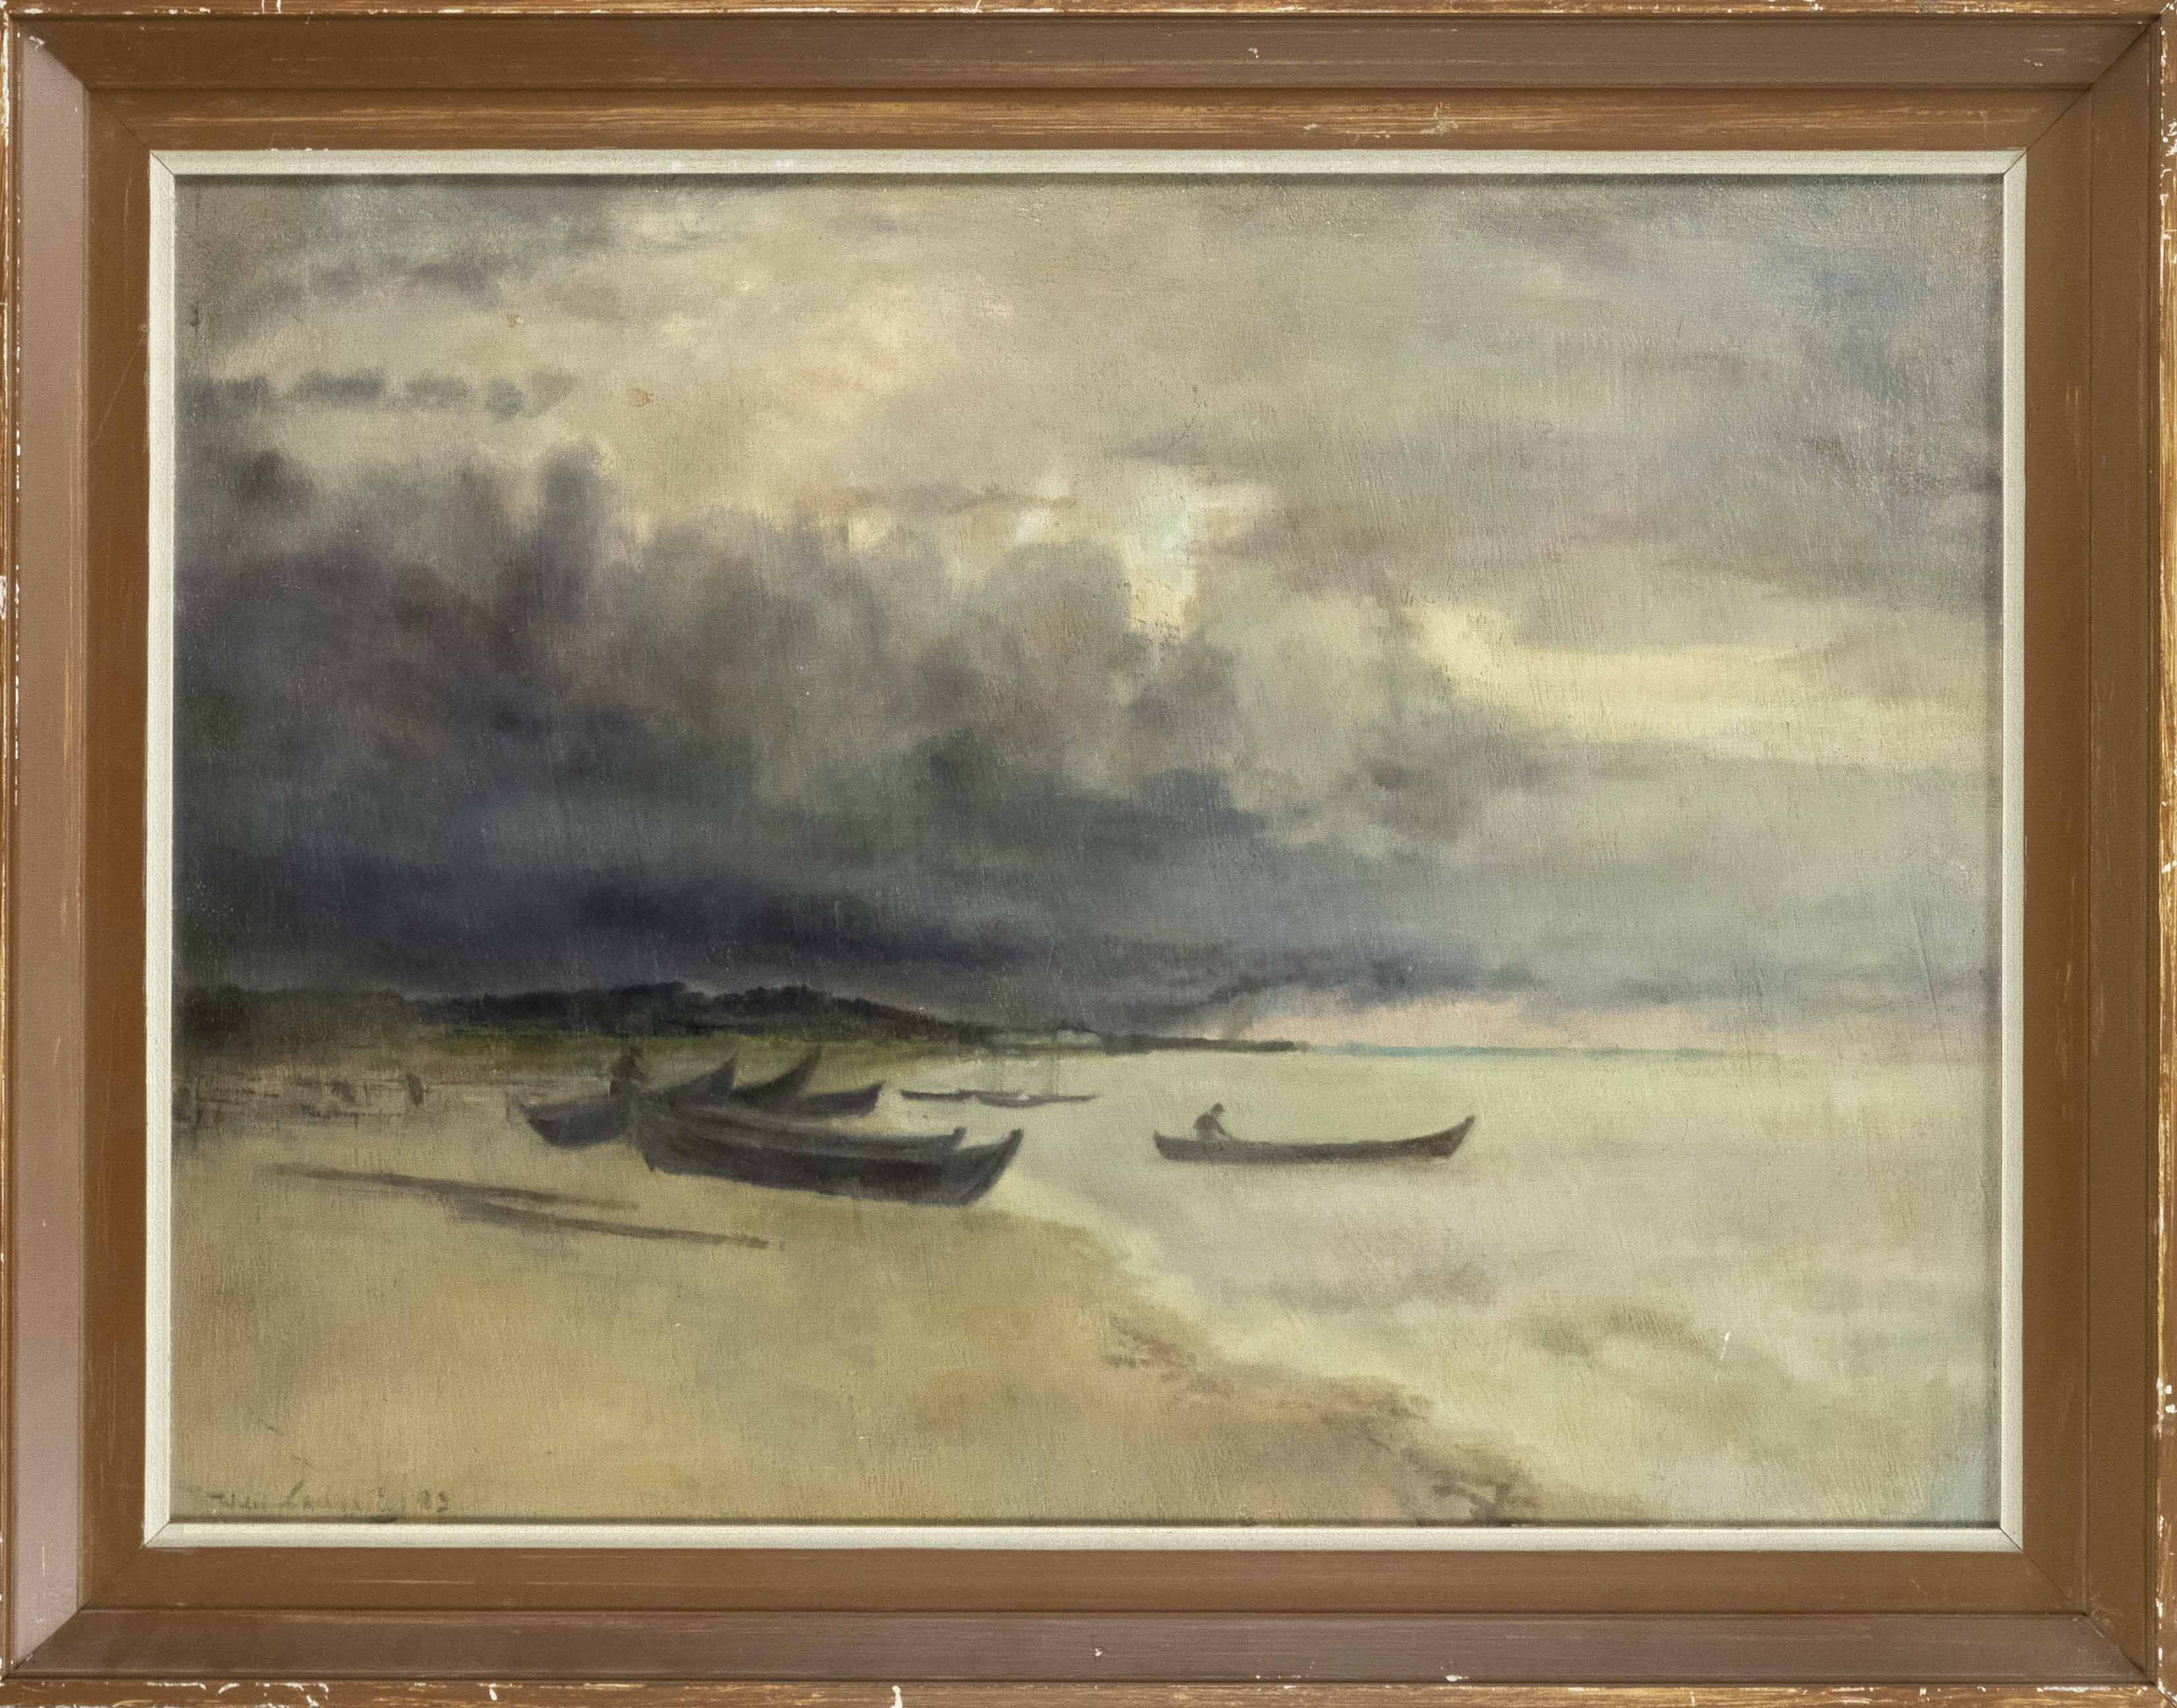 Unidentified painter 1st h. 20th c., Fisherman on the beach during a storm, oil on cardboard over